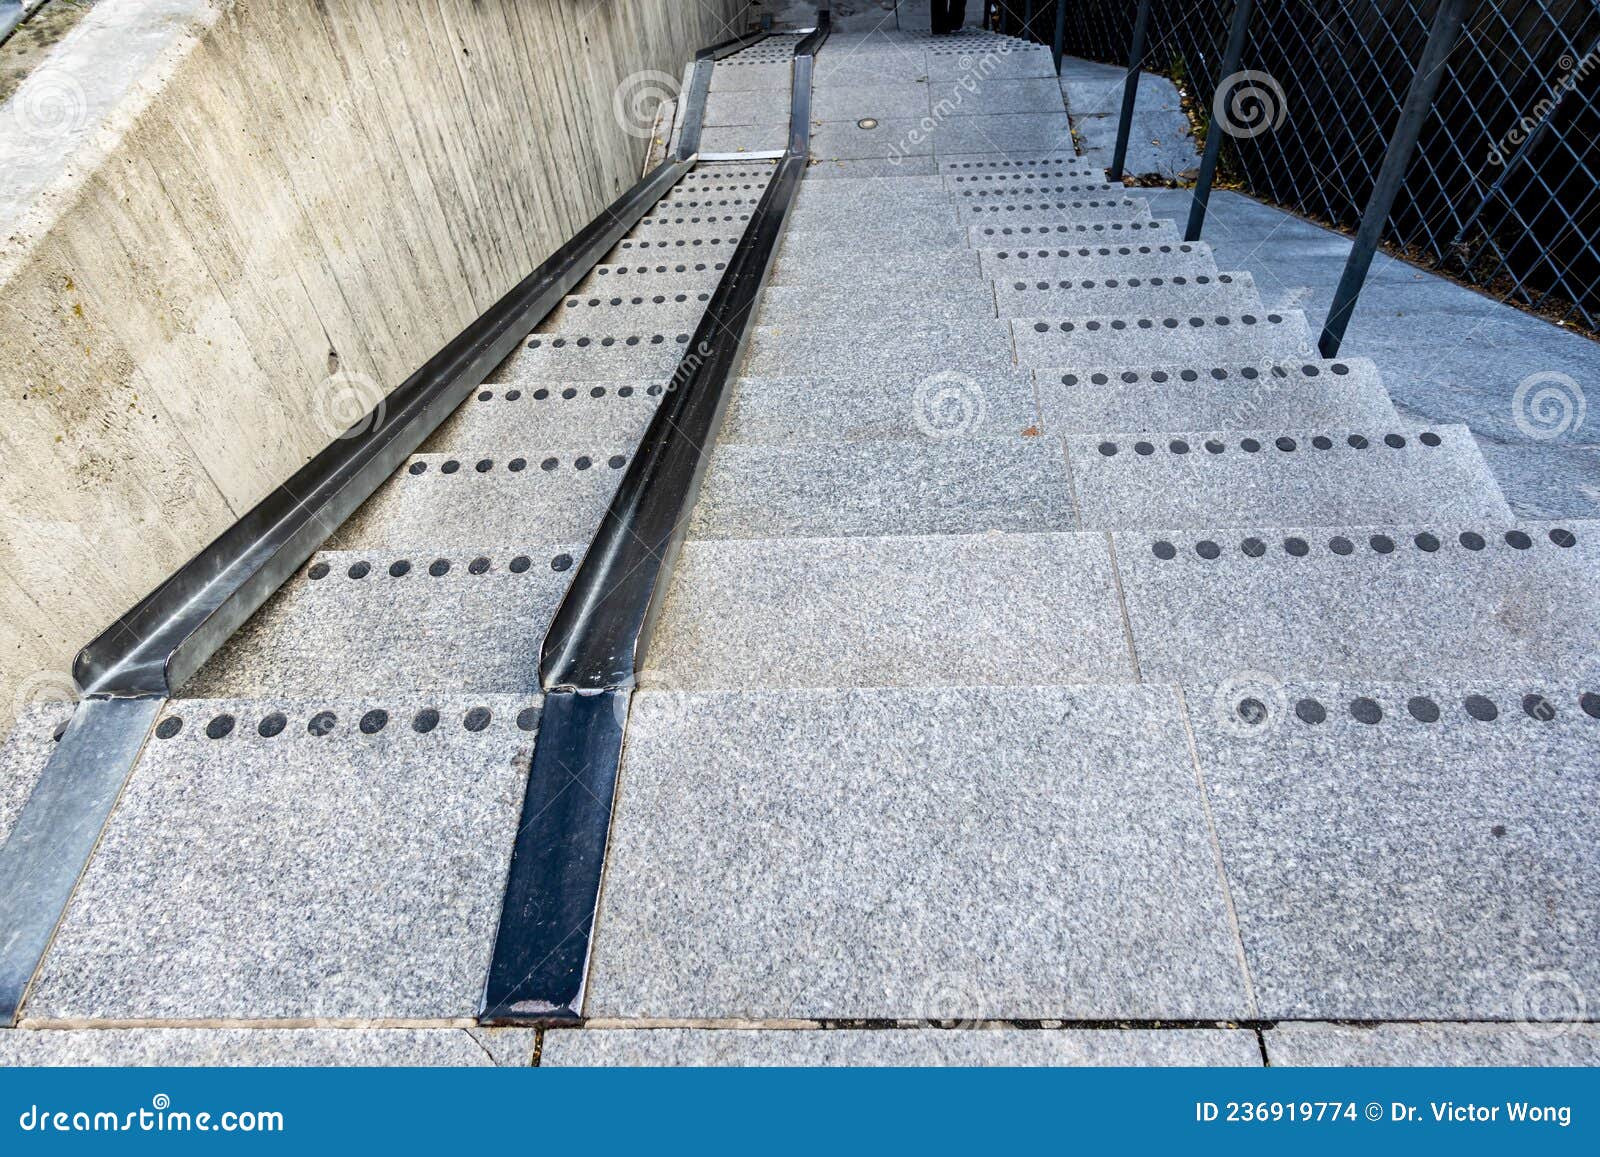 Downward Perspective View of a Public Stairwell Stock Photo - Image of ...